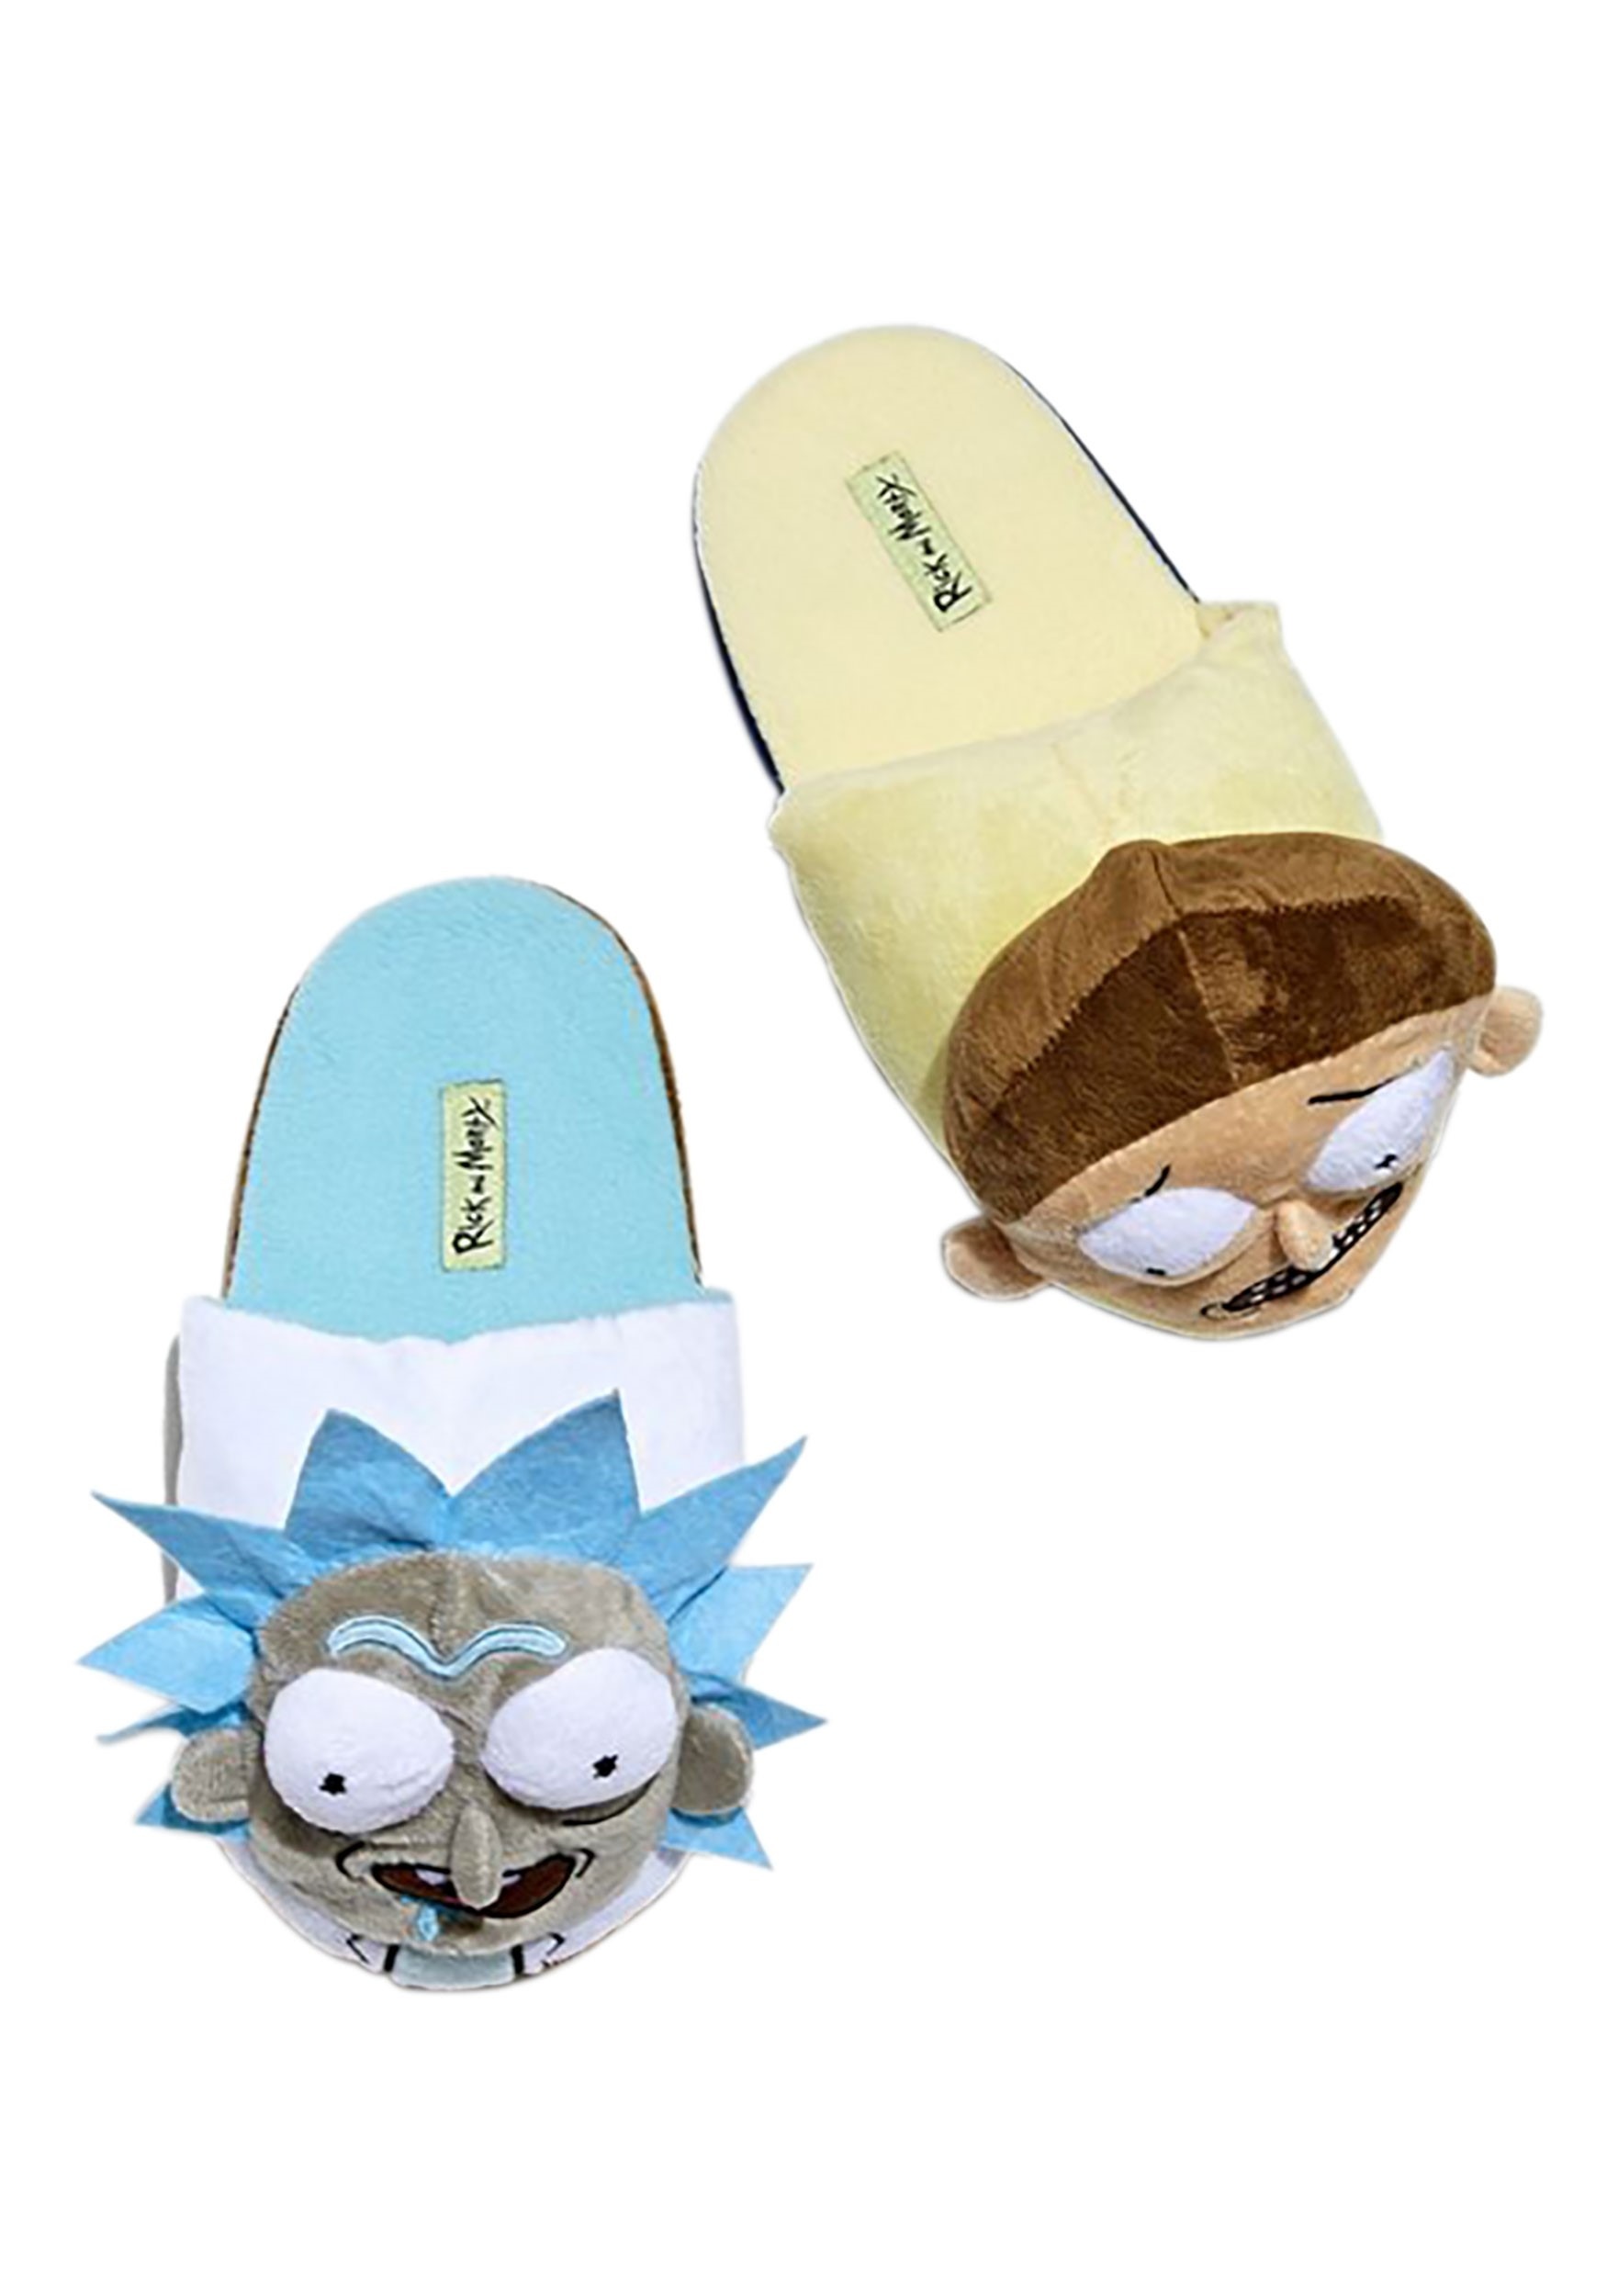 rick morty slippers